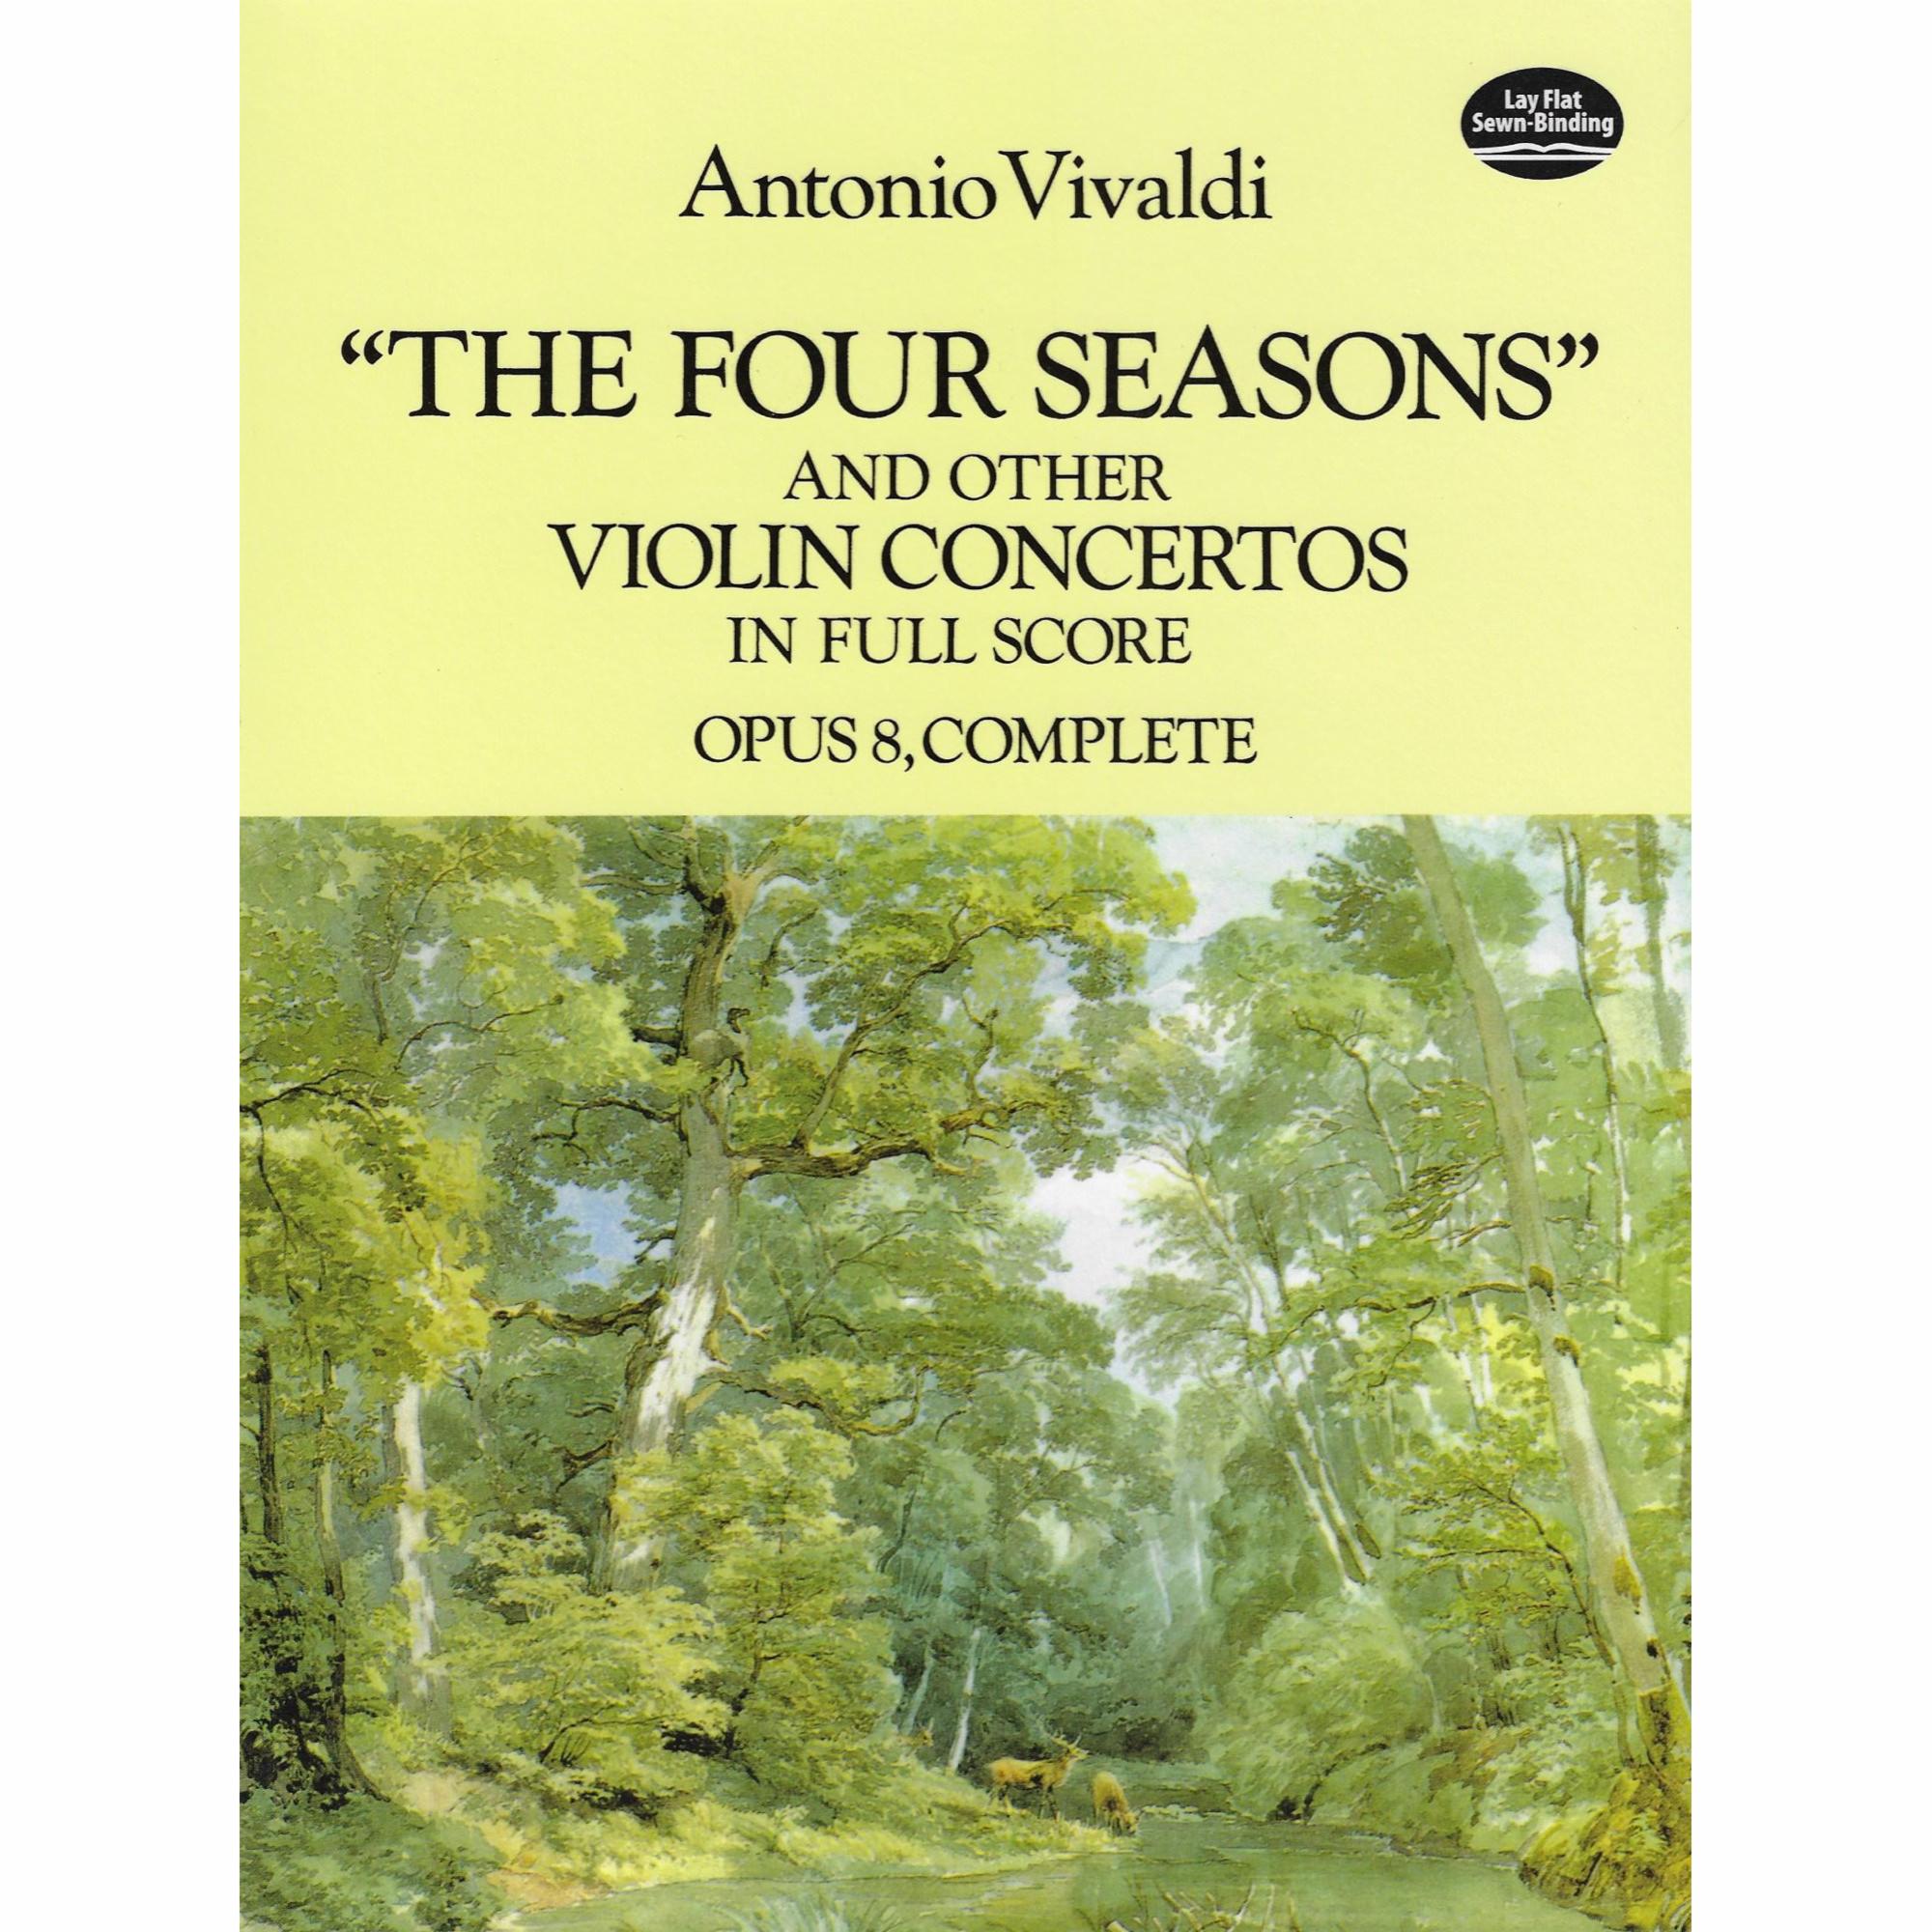 Vivaldi -- The Four Seasons and Other Violin Concertos in Full Score